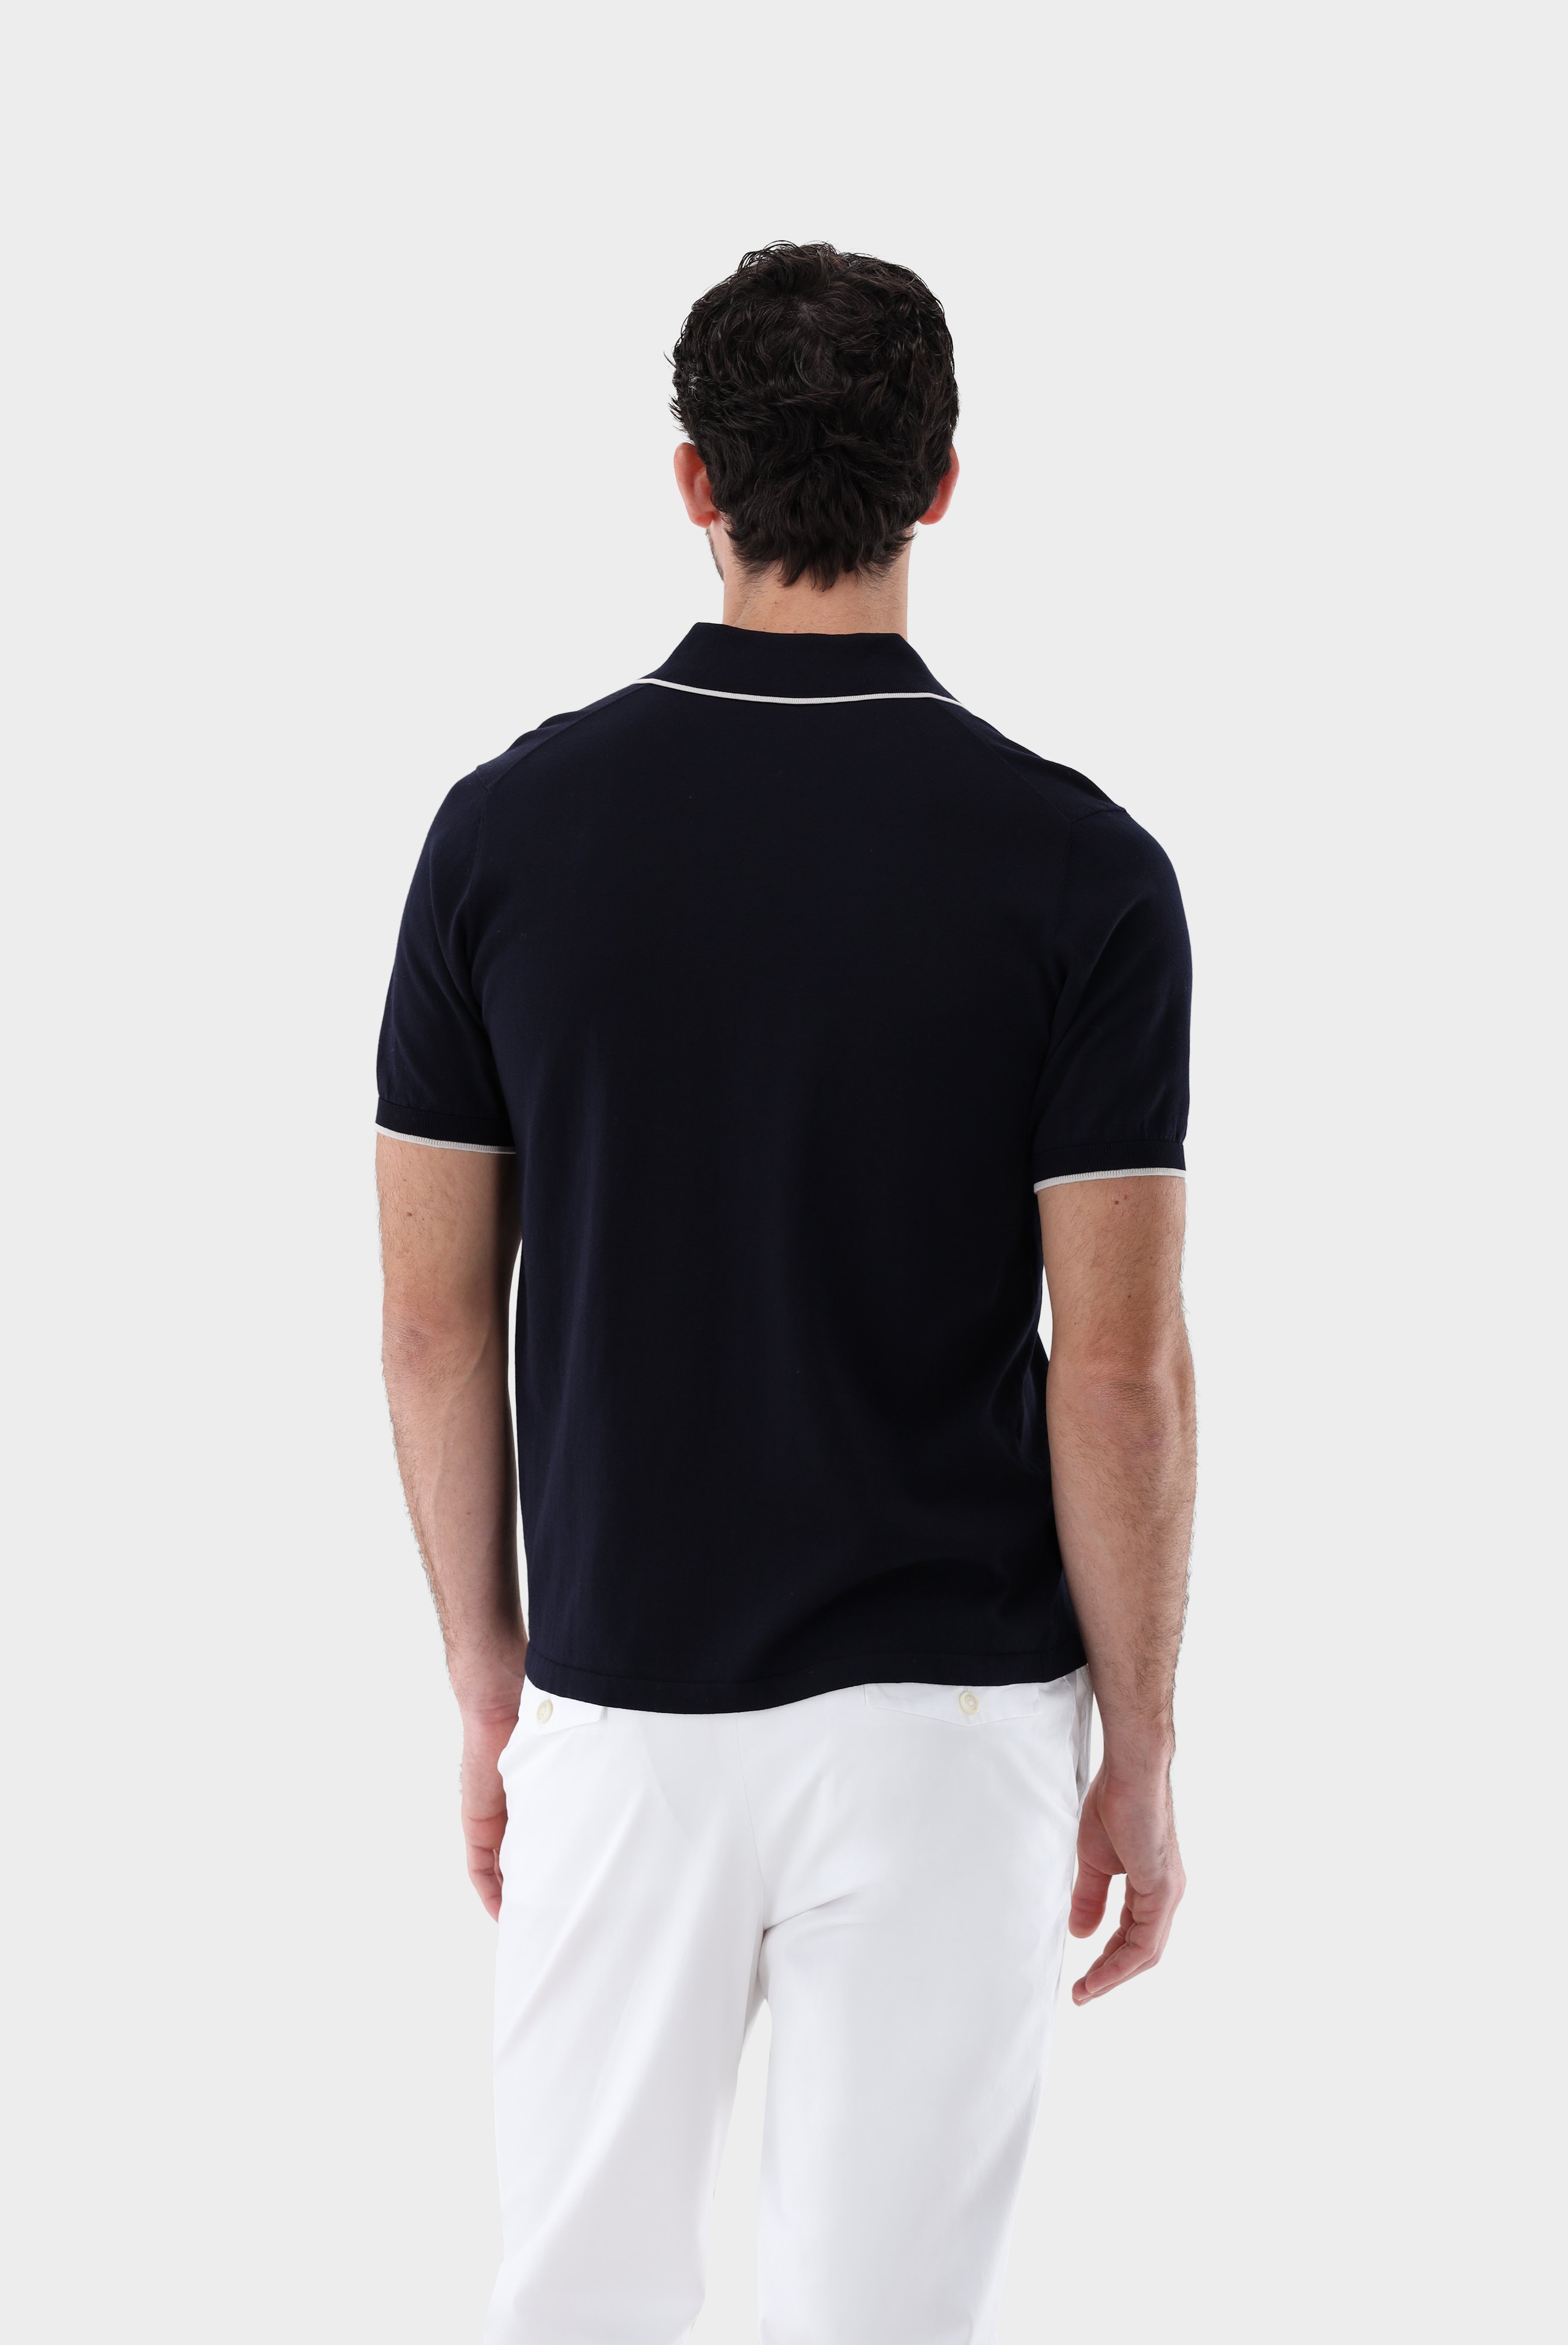 Poloshirts+Zip Knit-Polo in Air Cotton+82.8647.S7.S00174.795.L